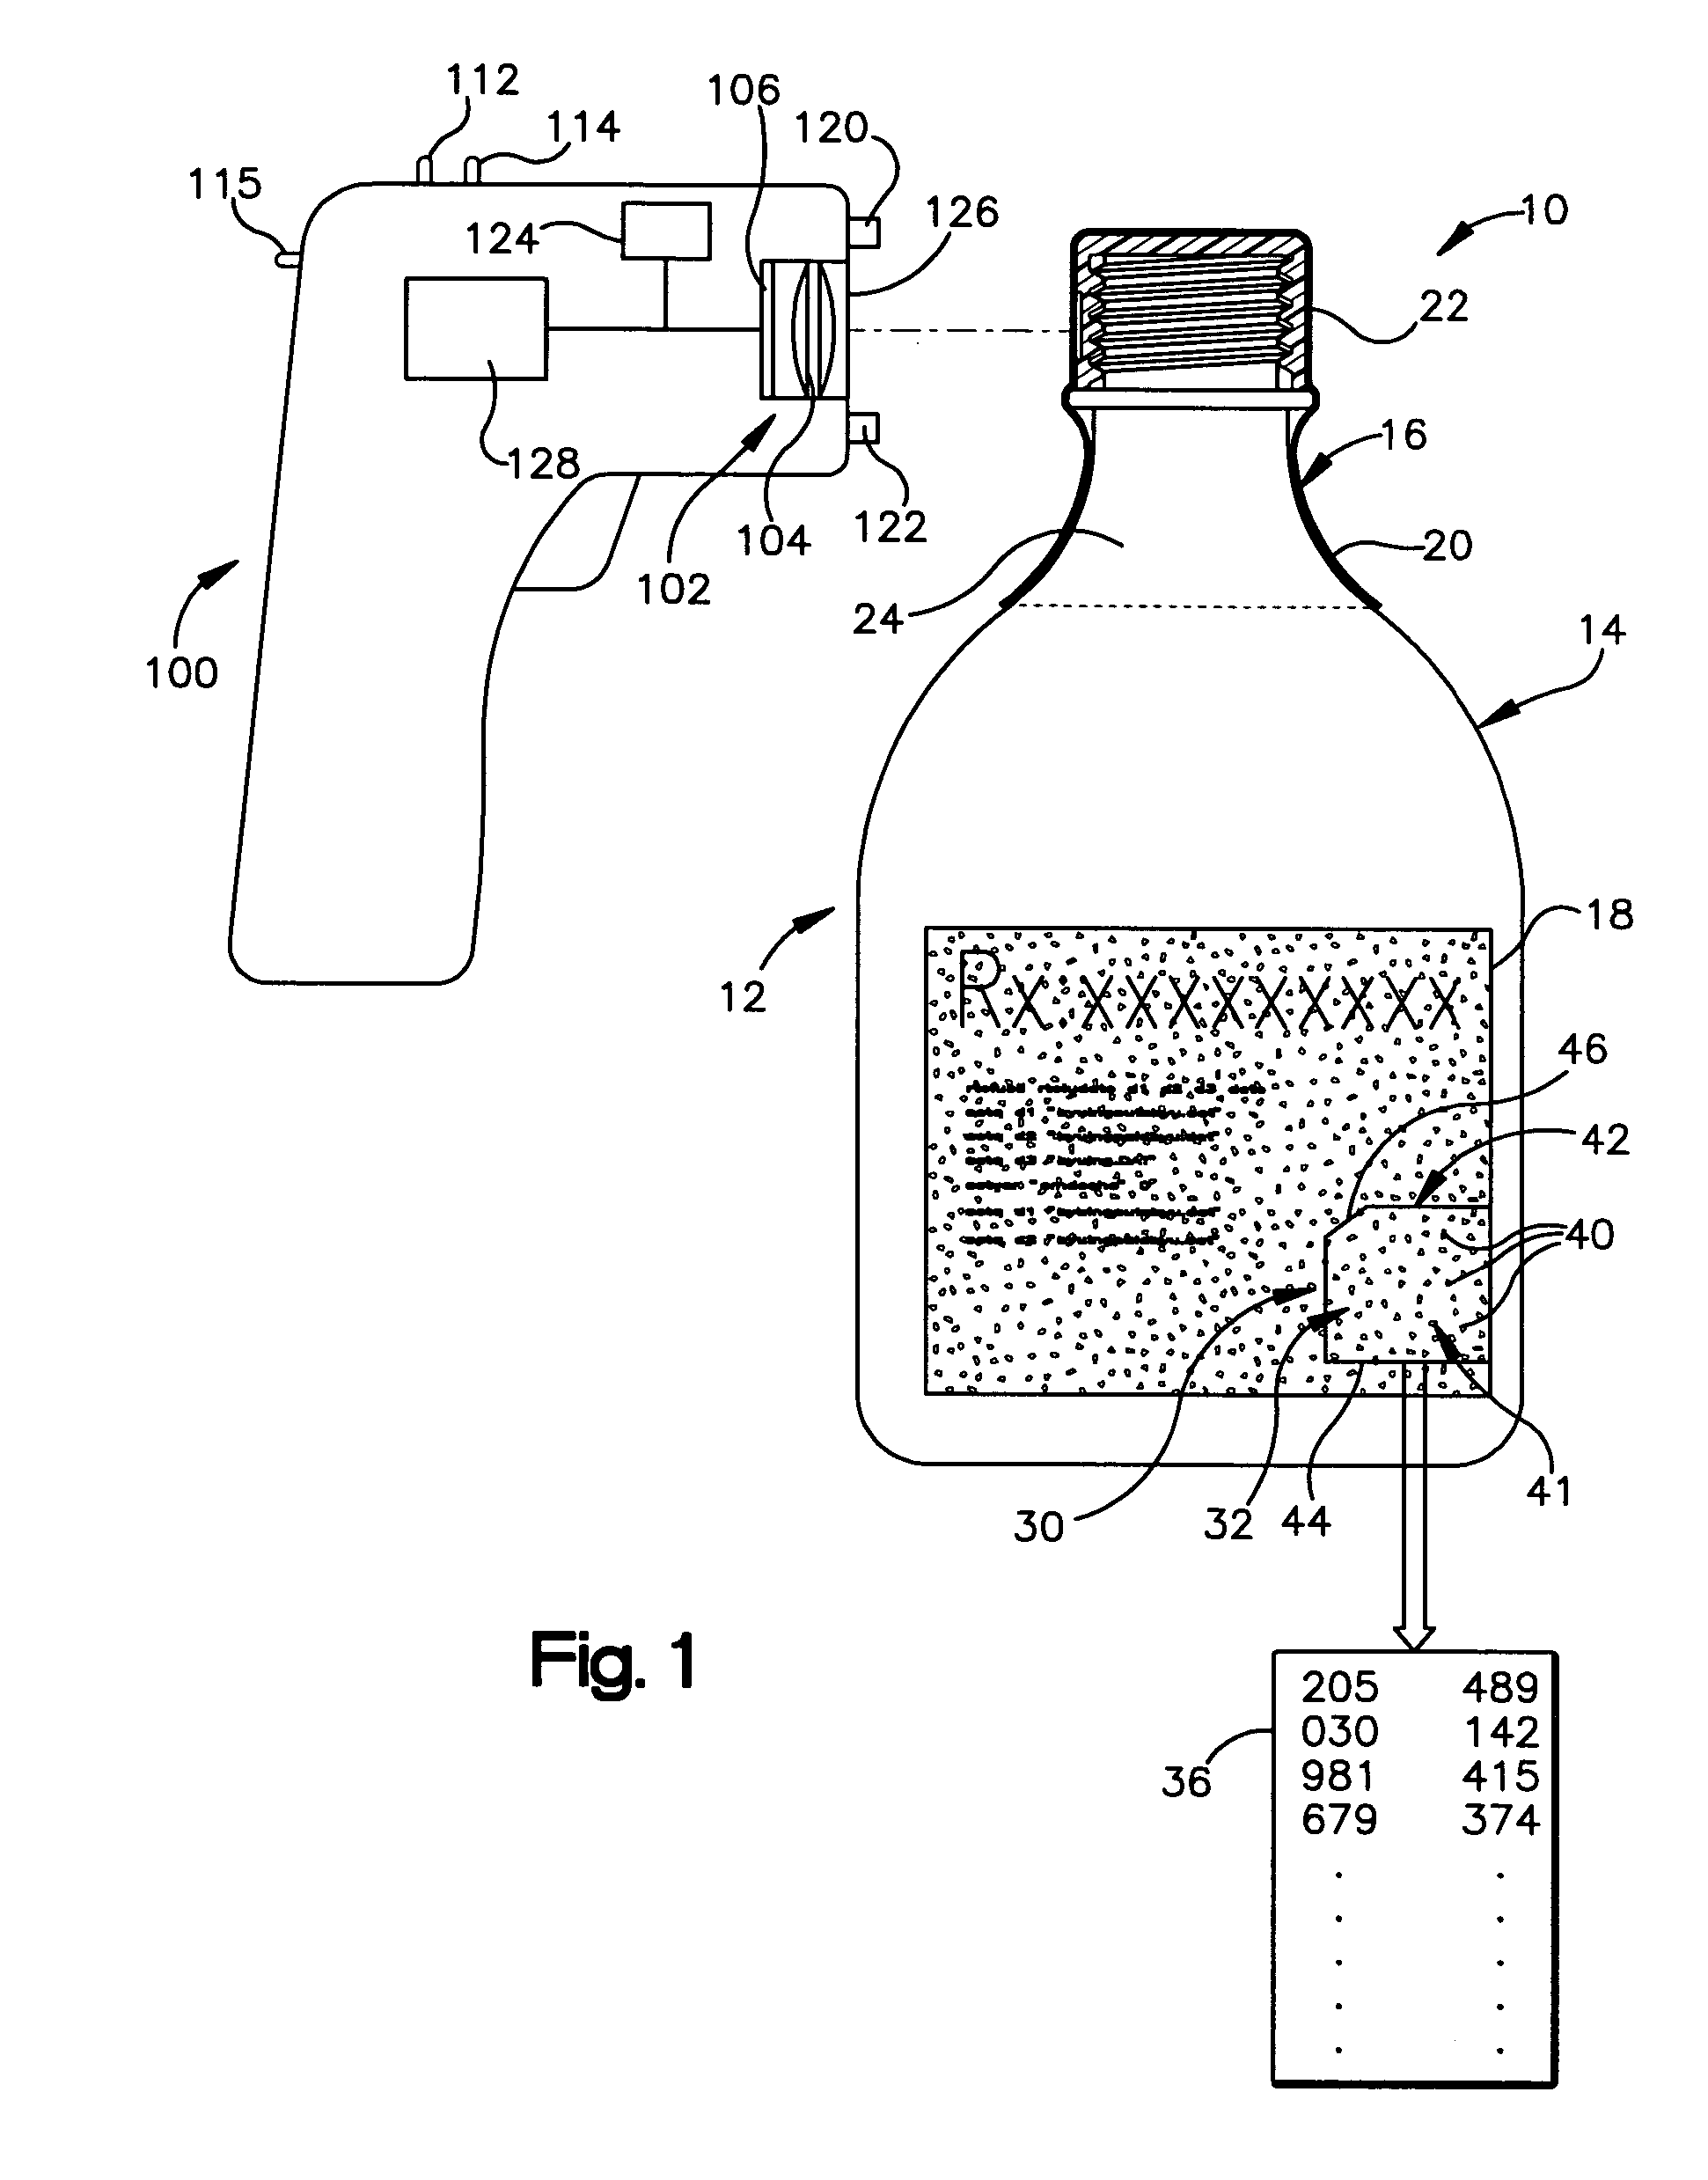 Method of authenticating products using analog and digital identifiers